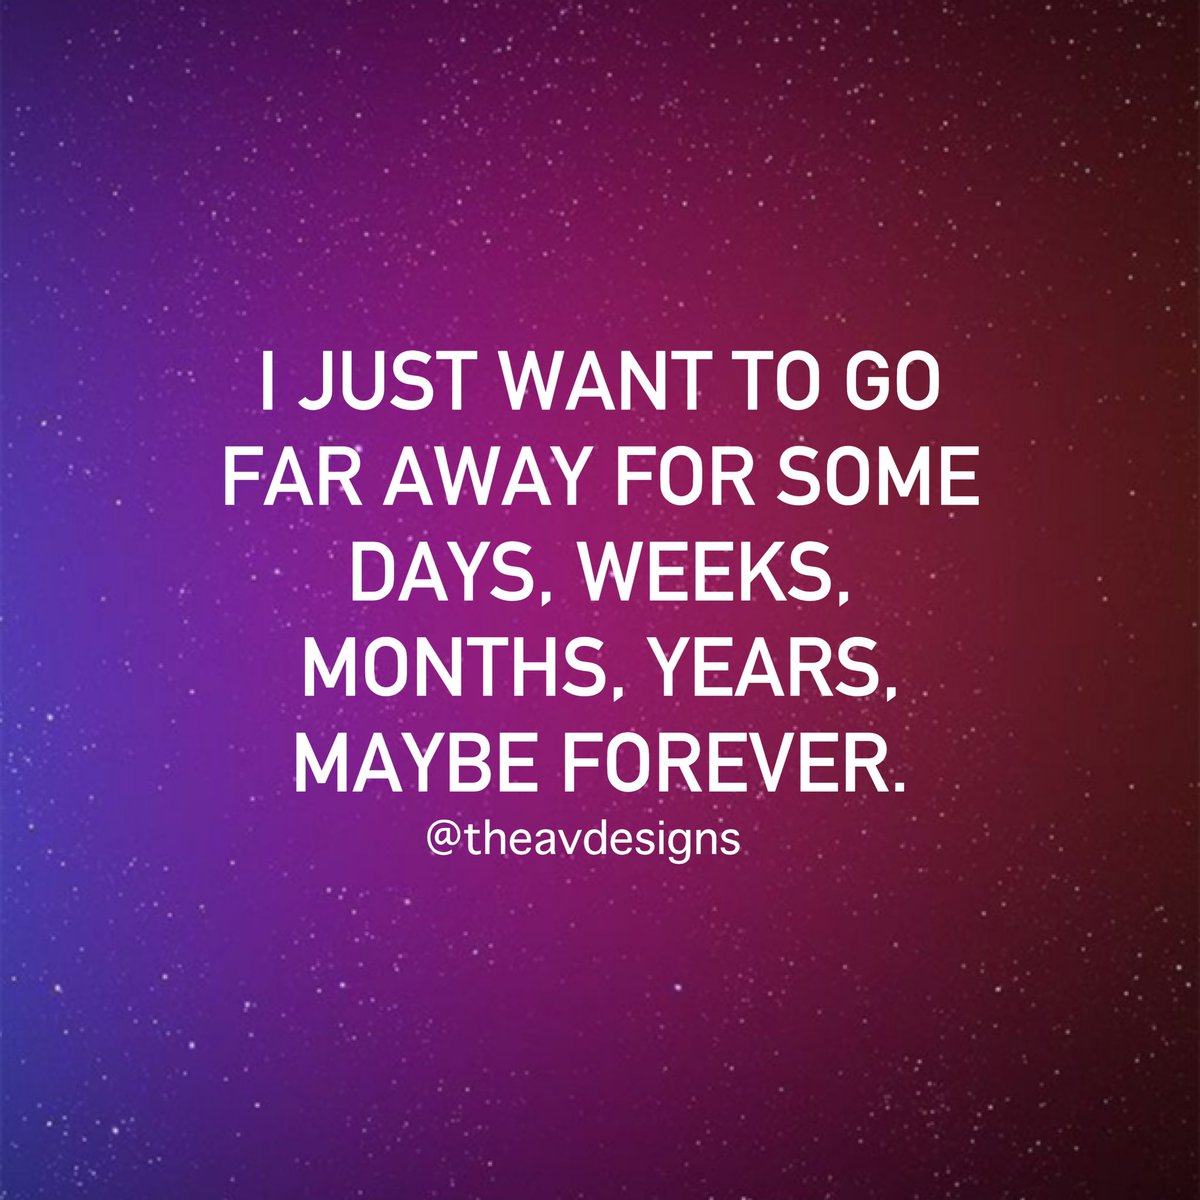 Av Designs I Just Want To Go Far Away For Some Days Weeks Months Maybe Forever Gofaraway Influencer Quotesdaily Becomememories Wanttogo Wantyouback Faraway Quotes Days Months Weeks Years Theavdesigns Av